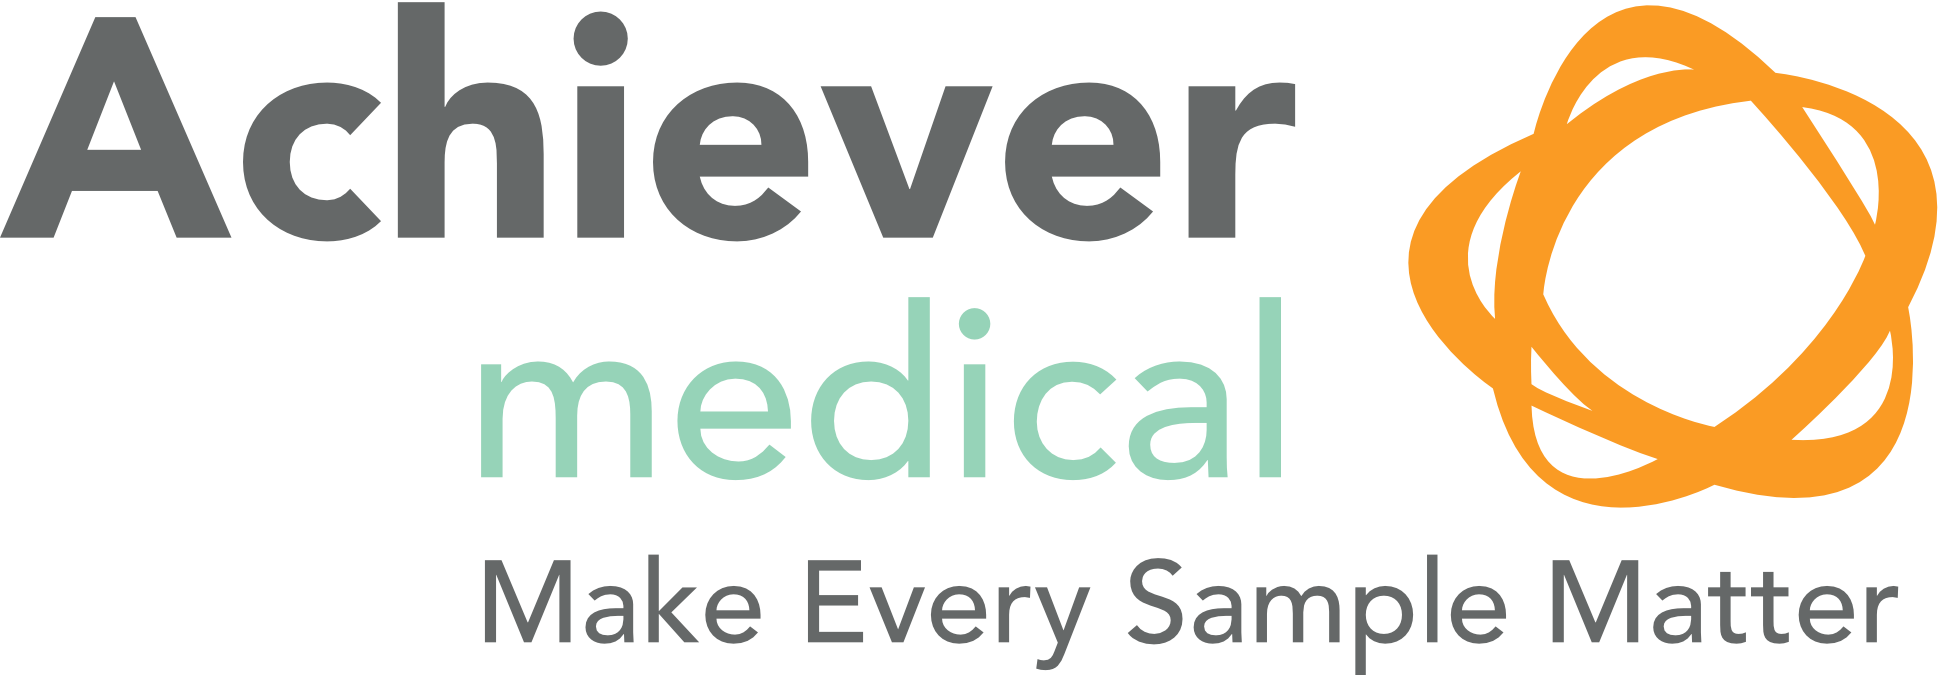 Achiever Medical LIMS - Make Every Sample Matter